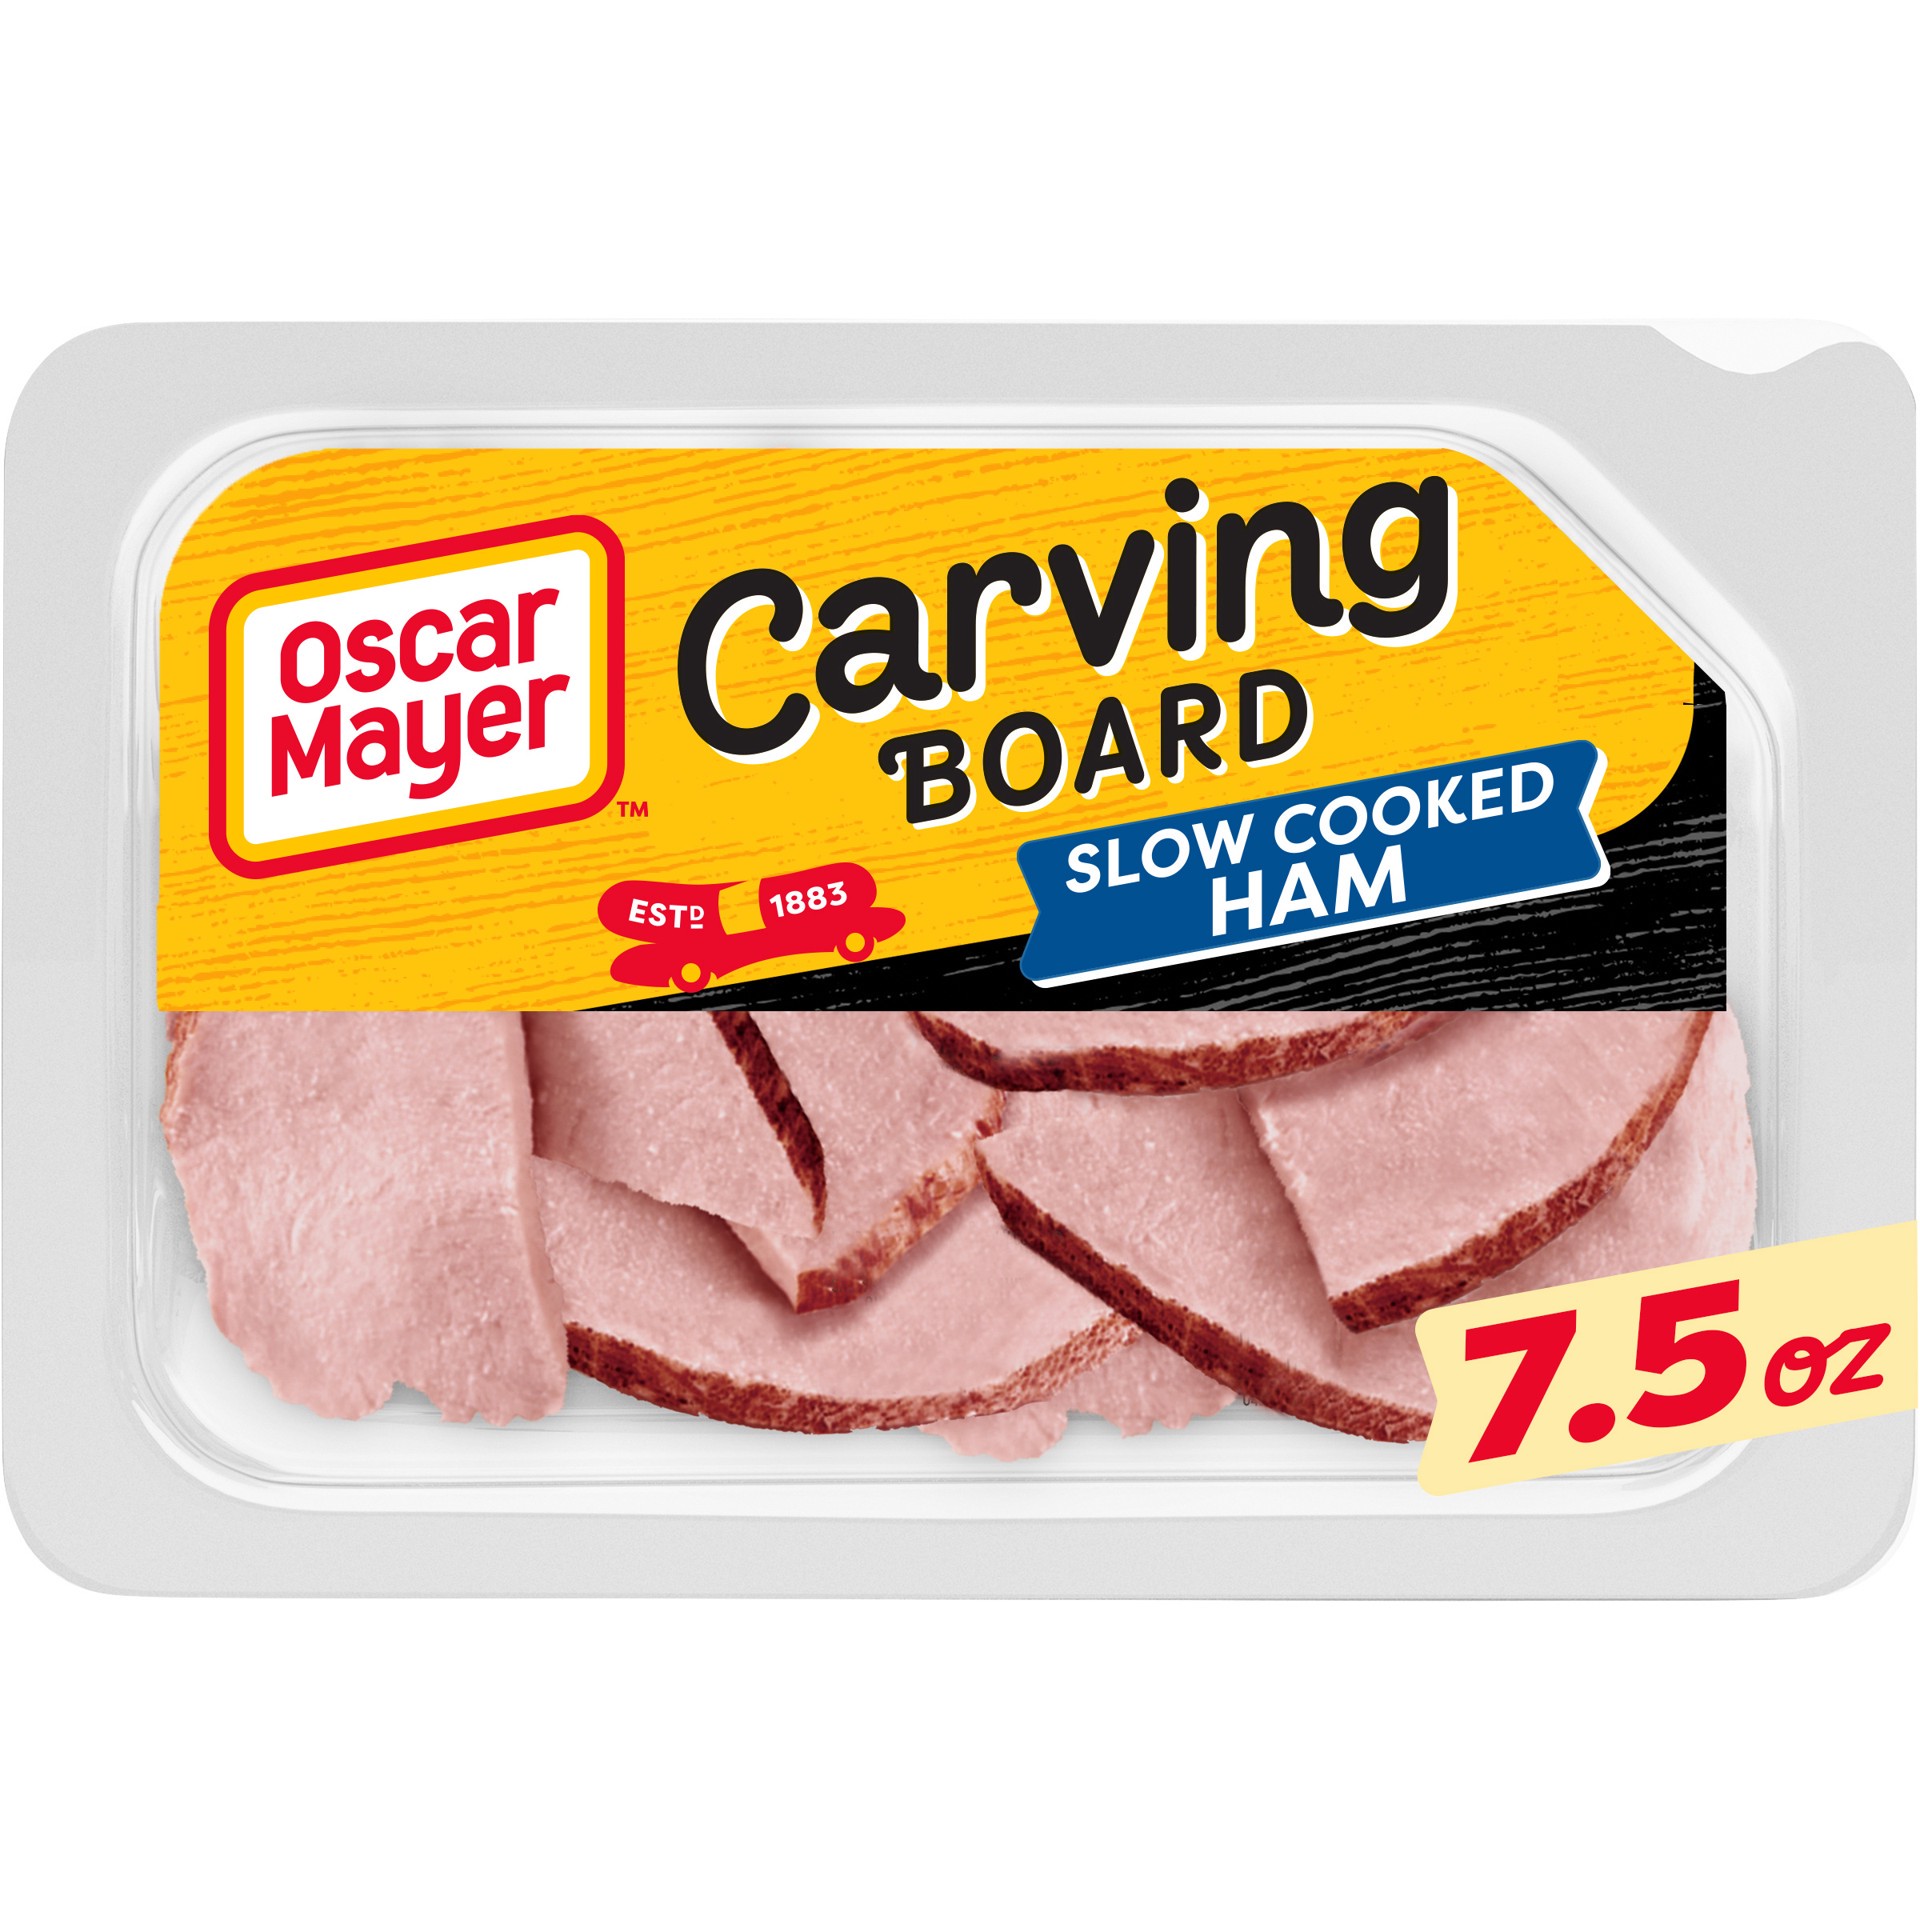 slide 1 of 8, Oscar Mayer Carving Board Slow Cooked Ham Sliced Lunch Meat Tray, 7.5 oz